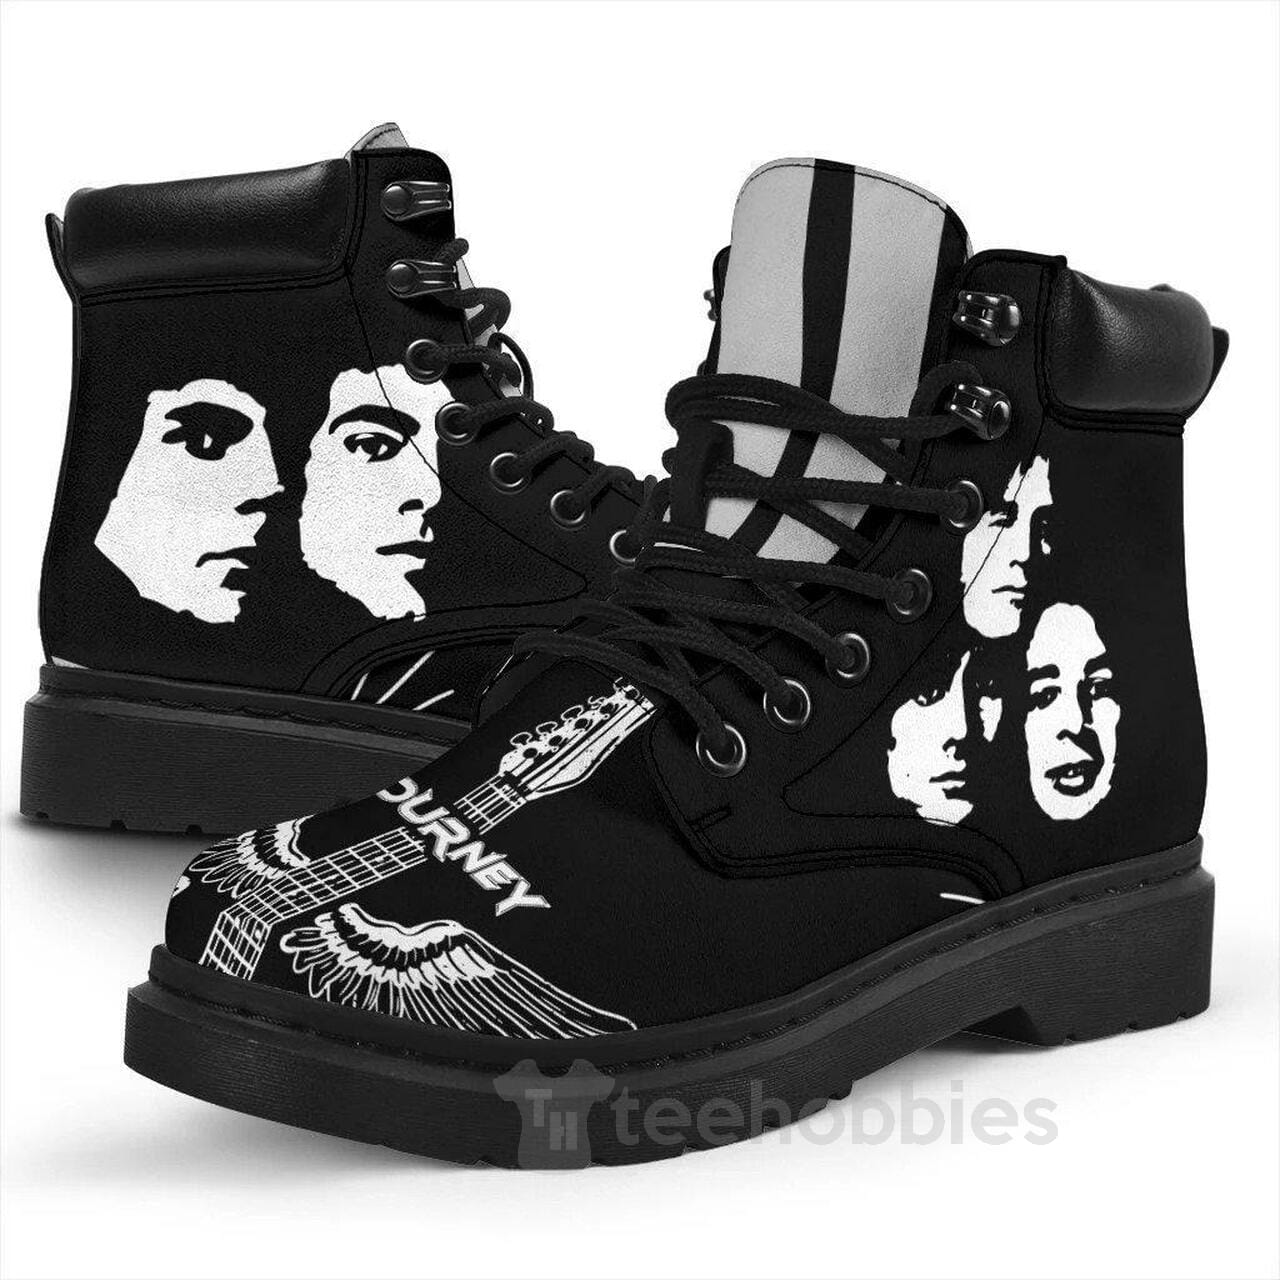 Journey Rock Band Winter Leather Boots Product photo 1